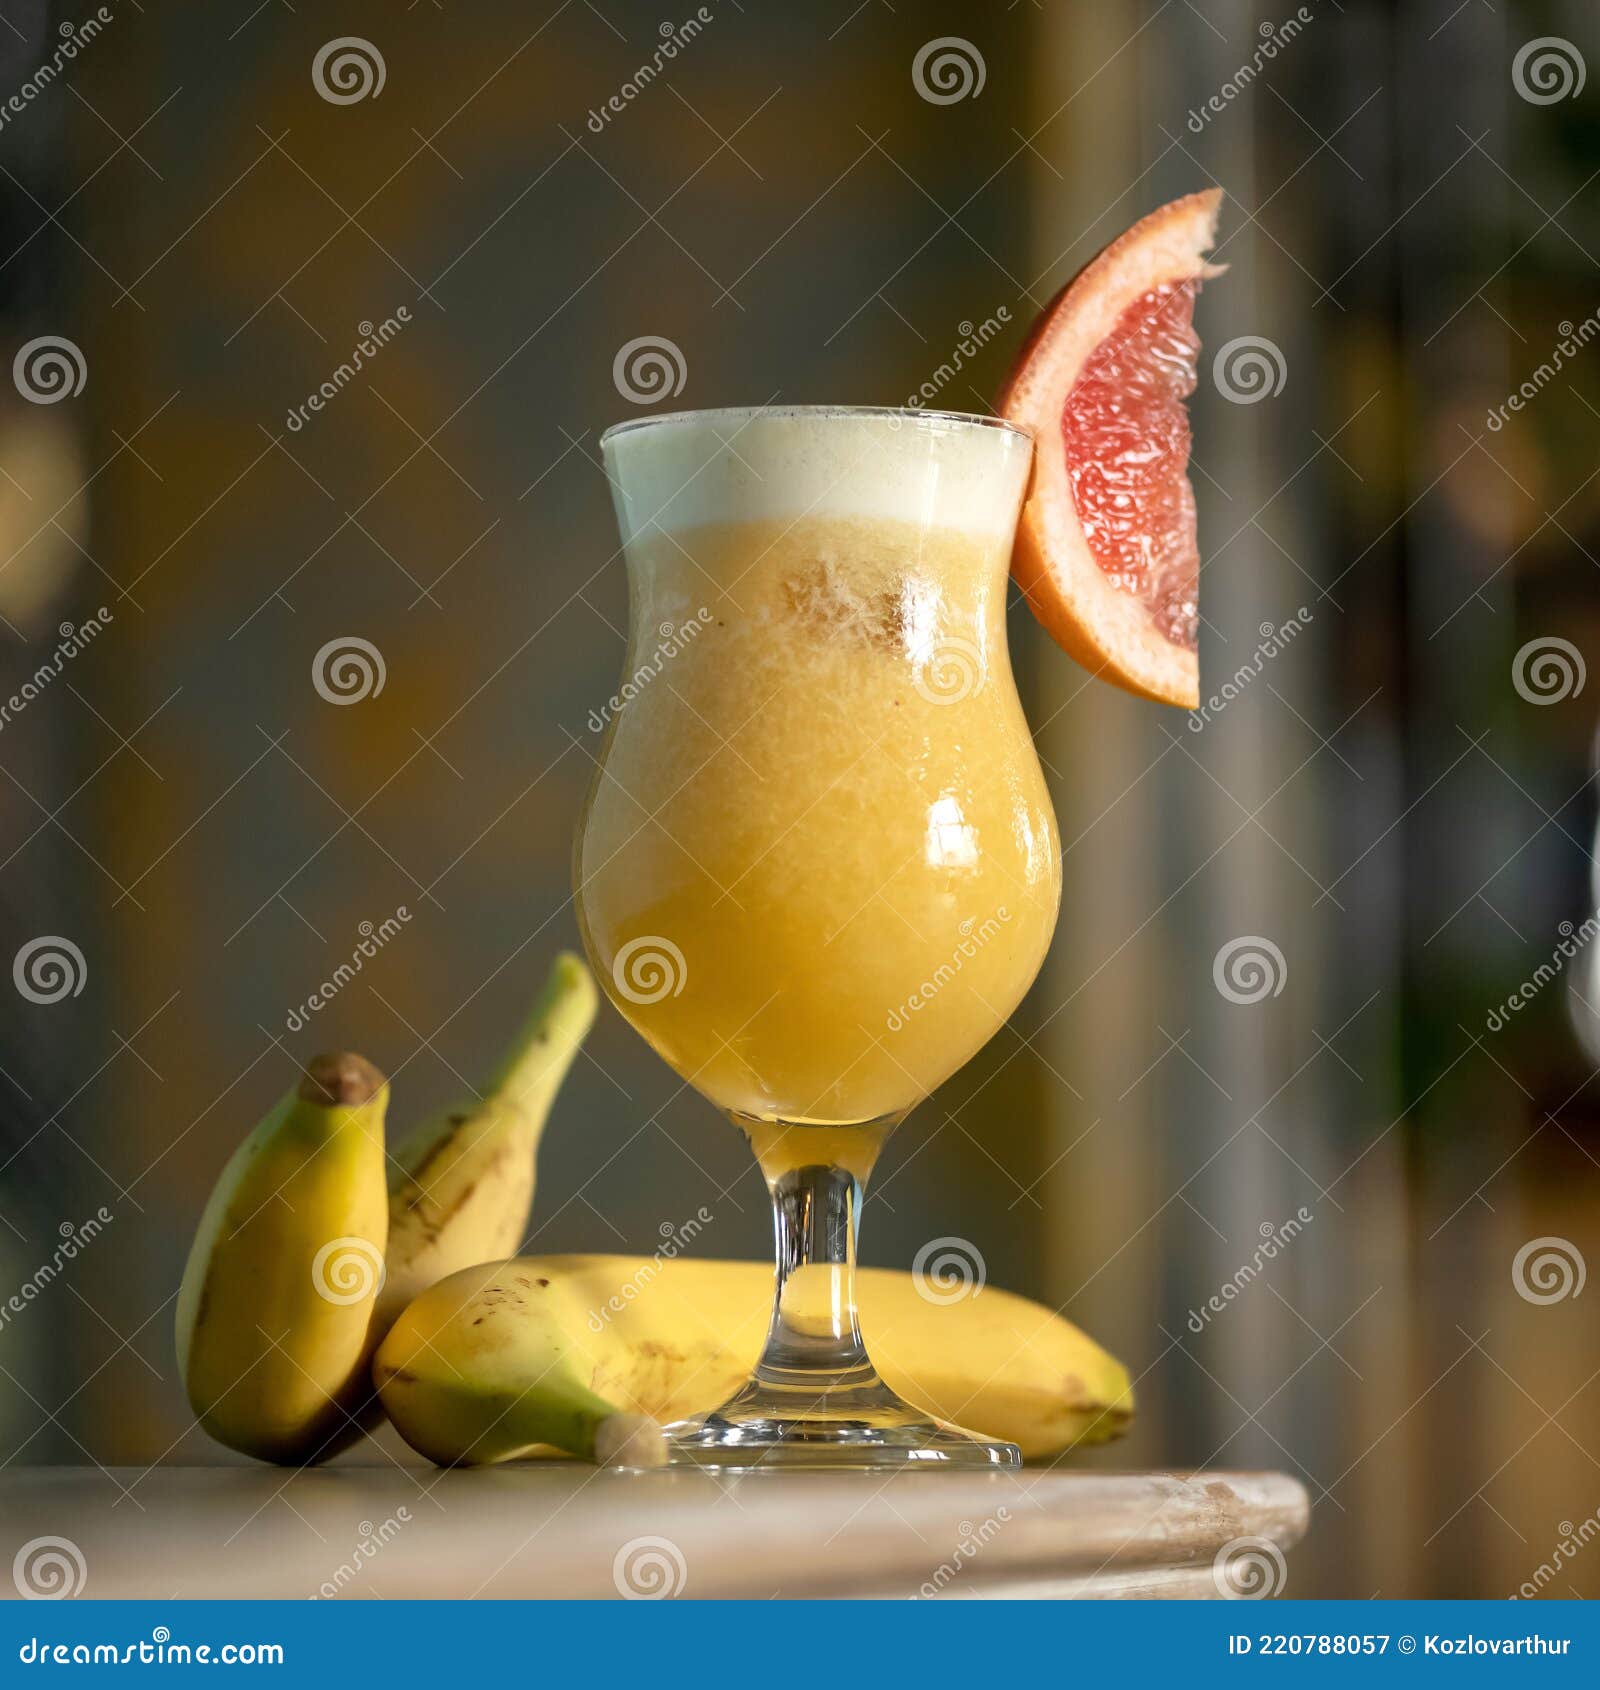 banana and citrus smoothie drink. goblet or glass with mixed shaked fruits on blurred background. refreshing detox